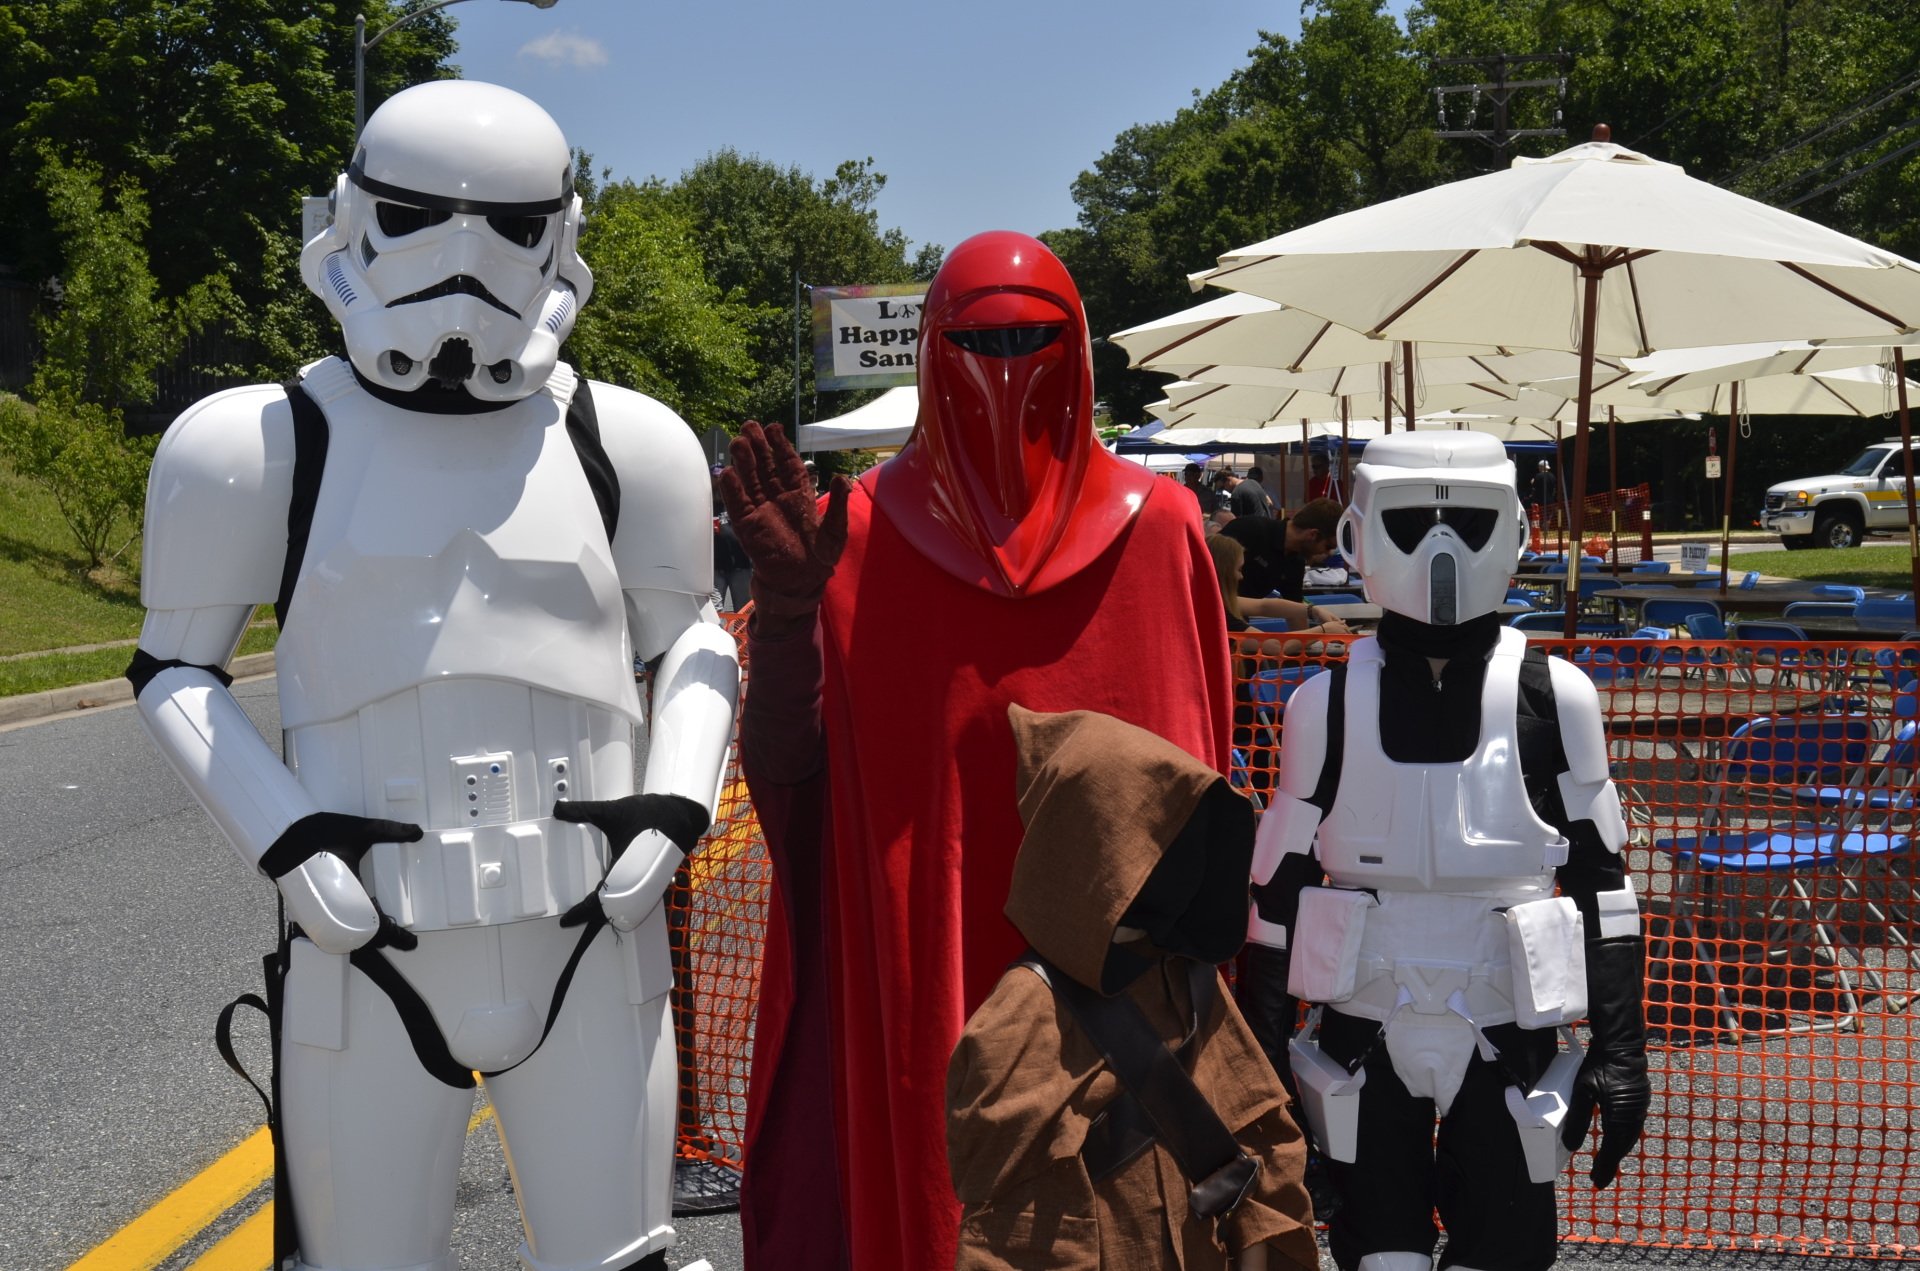 Four People dressed in Star Wars Costumes